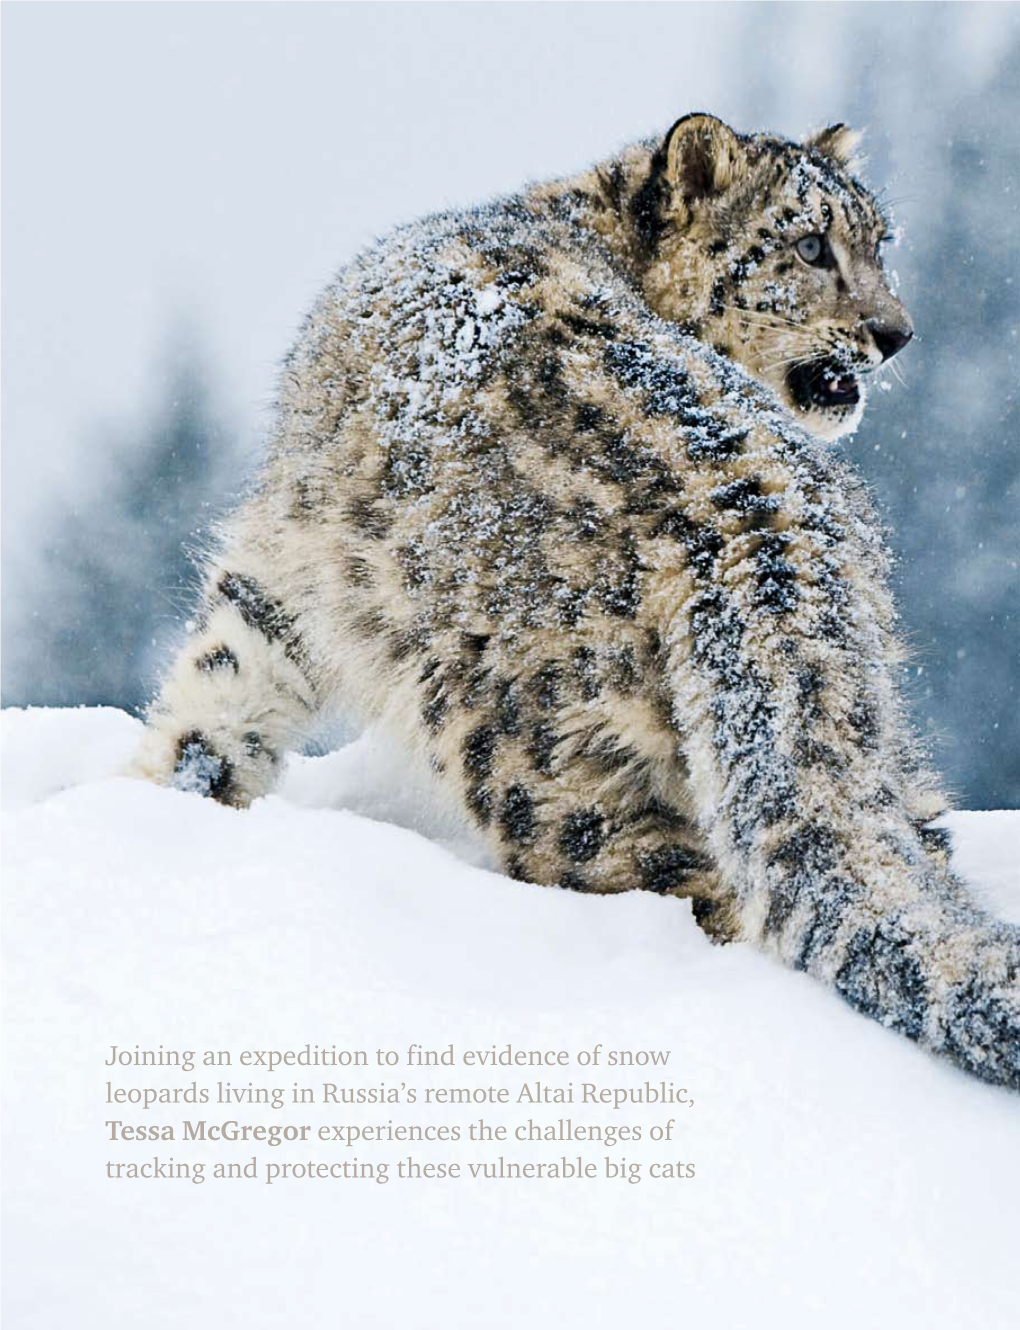 Joining an Expedition to Find Evidence of Snow Leopards Living in Russia's